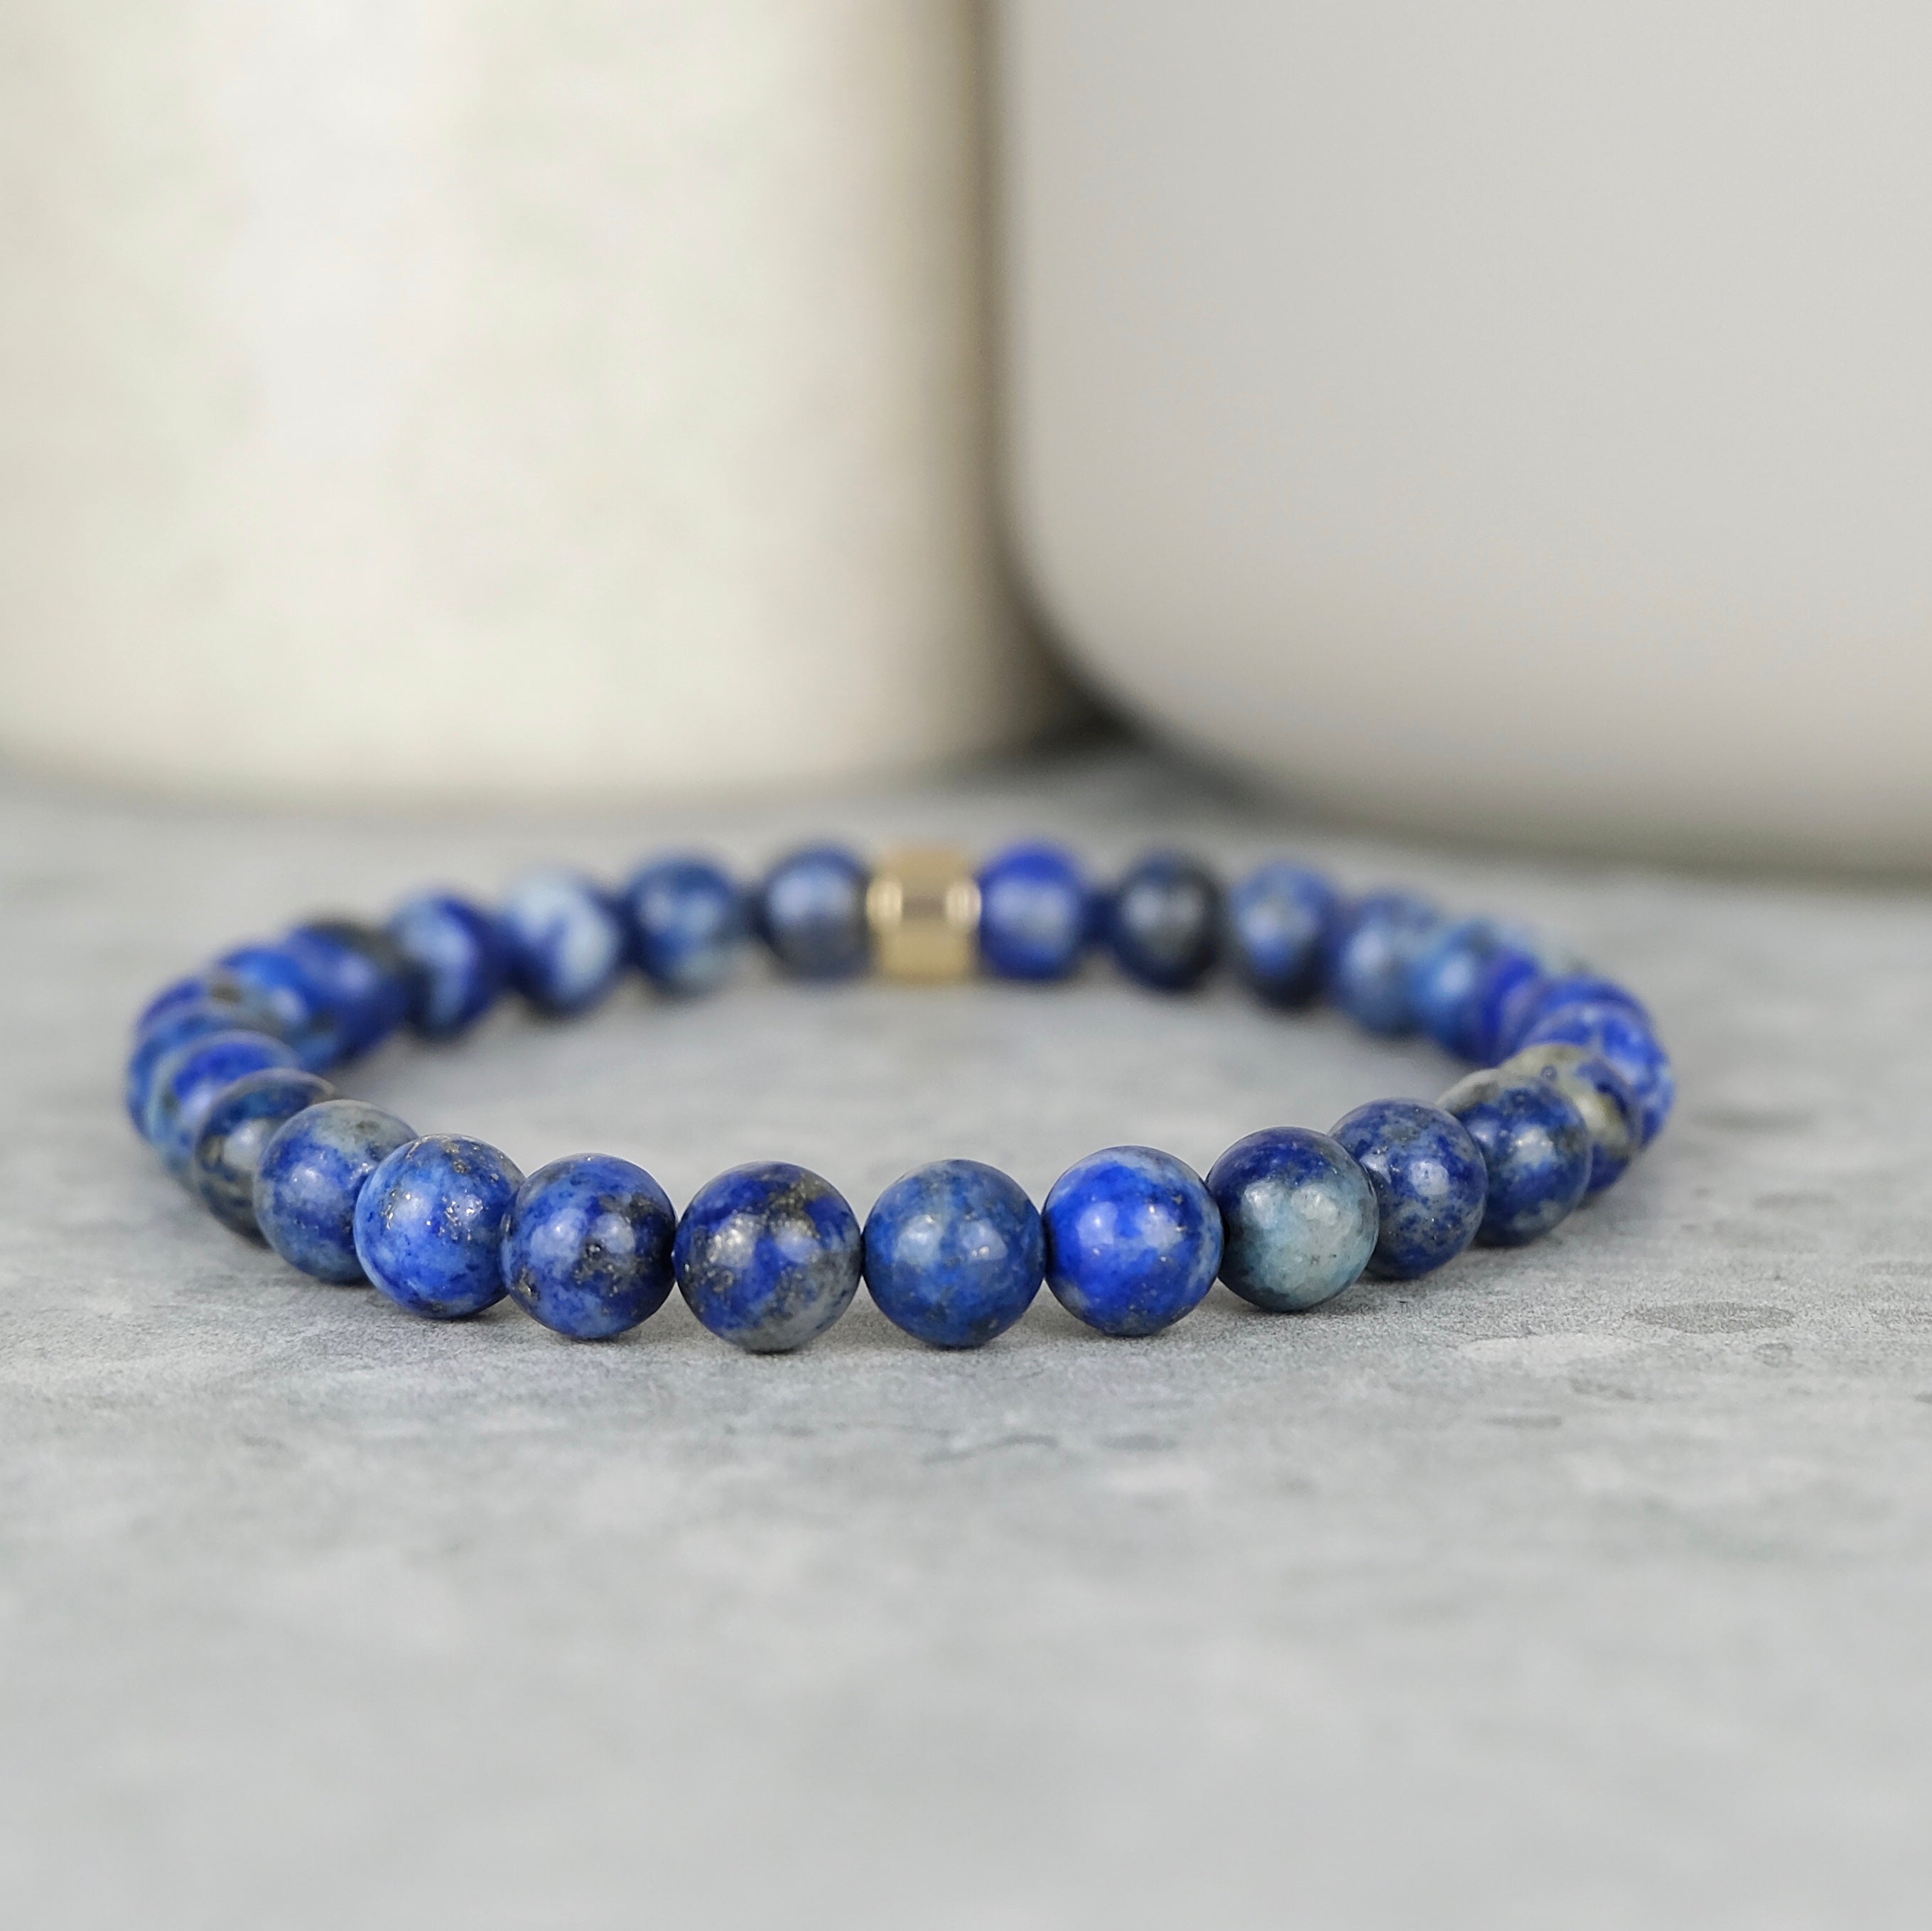 Lapis lazuli gemstone bracelet in 6mm beads with gold accessory